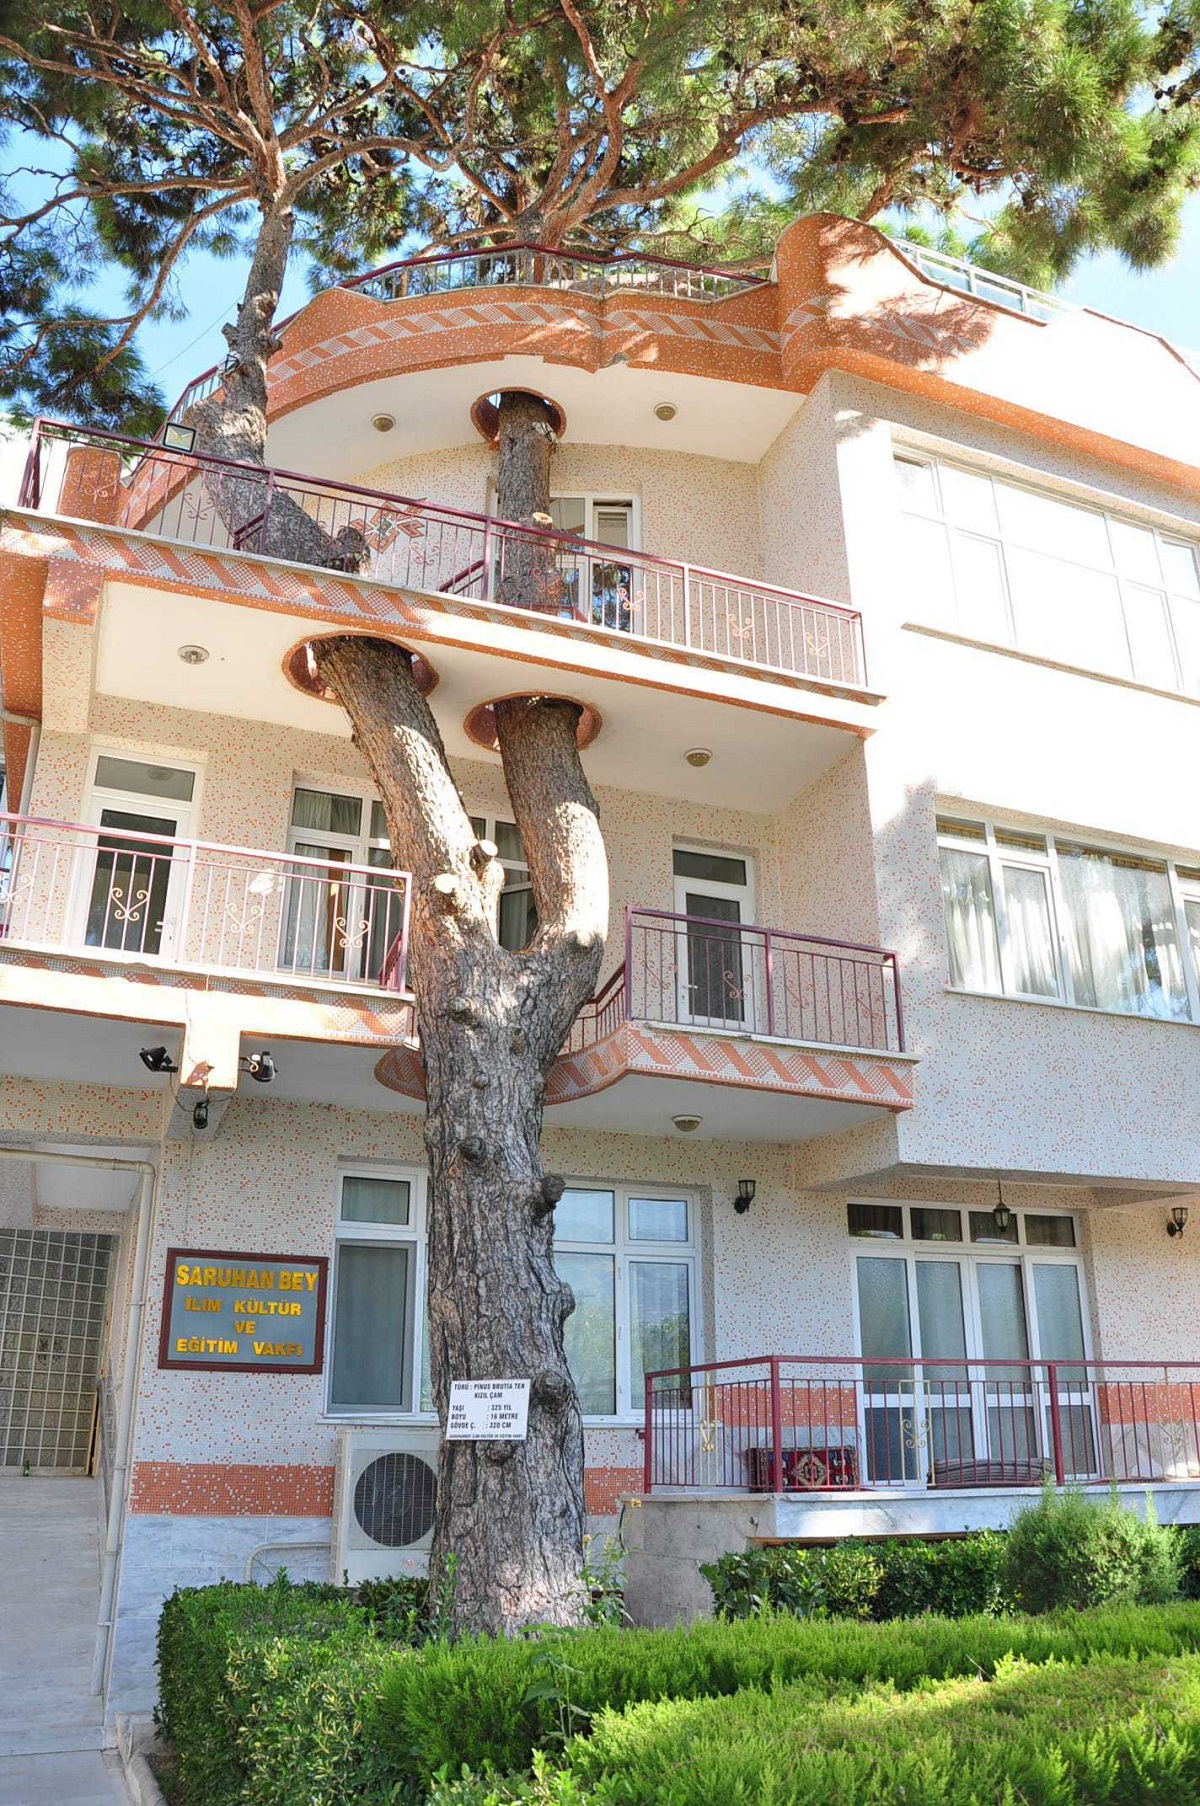 This 325-Year-Old Tree Was Utilized In The Building Design When Authorities In Turkey Would Not Allow For Its Removal